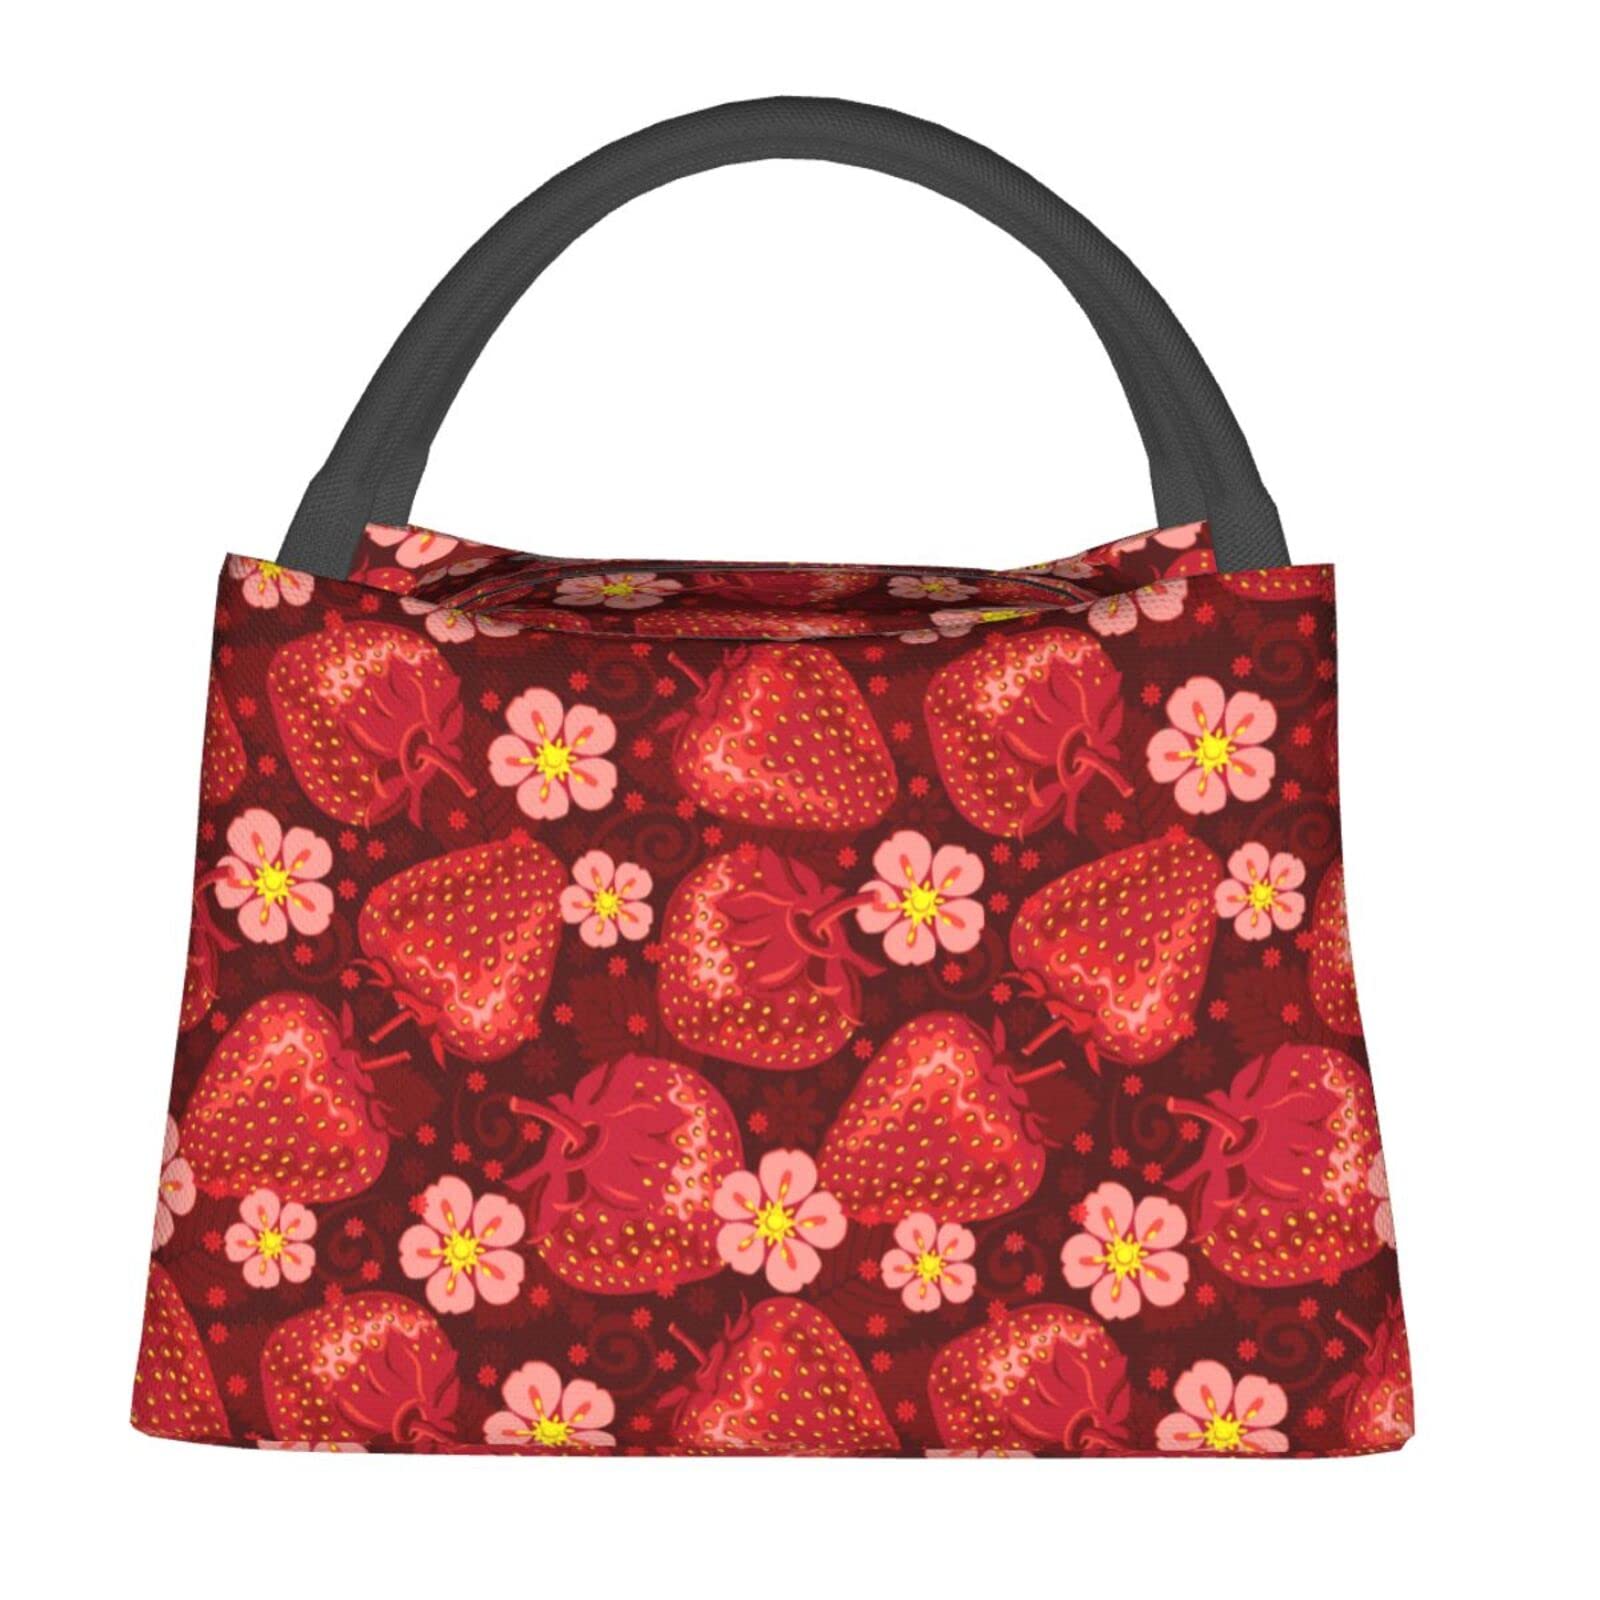 ASYG Strawberry Lunch Box Picnic Bags Cute Tote Insulated Portable Cute Container Meal Bag Lunch Box for Women